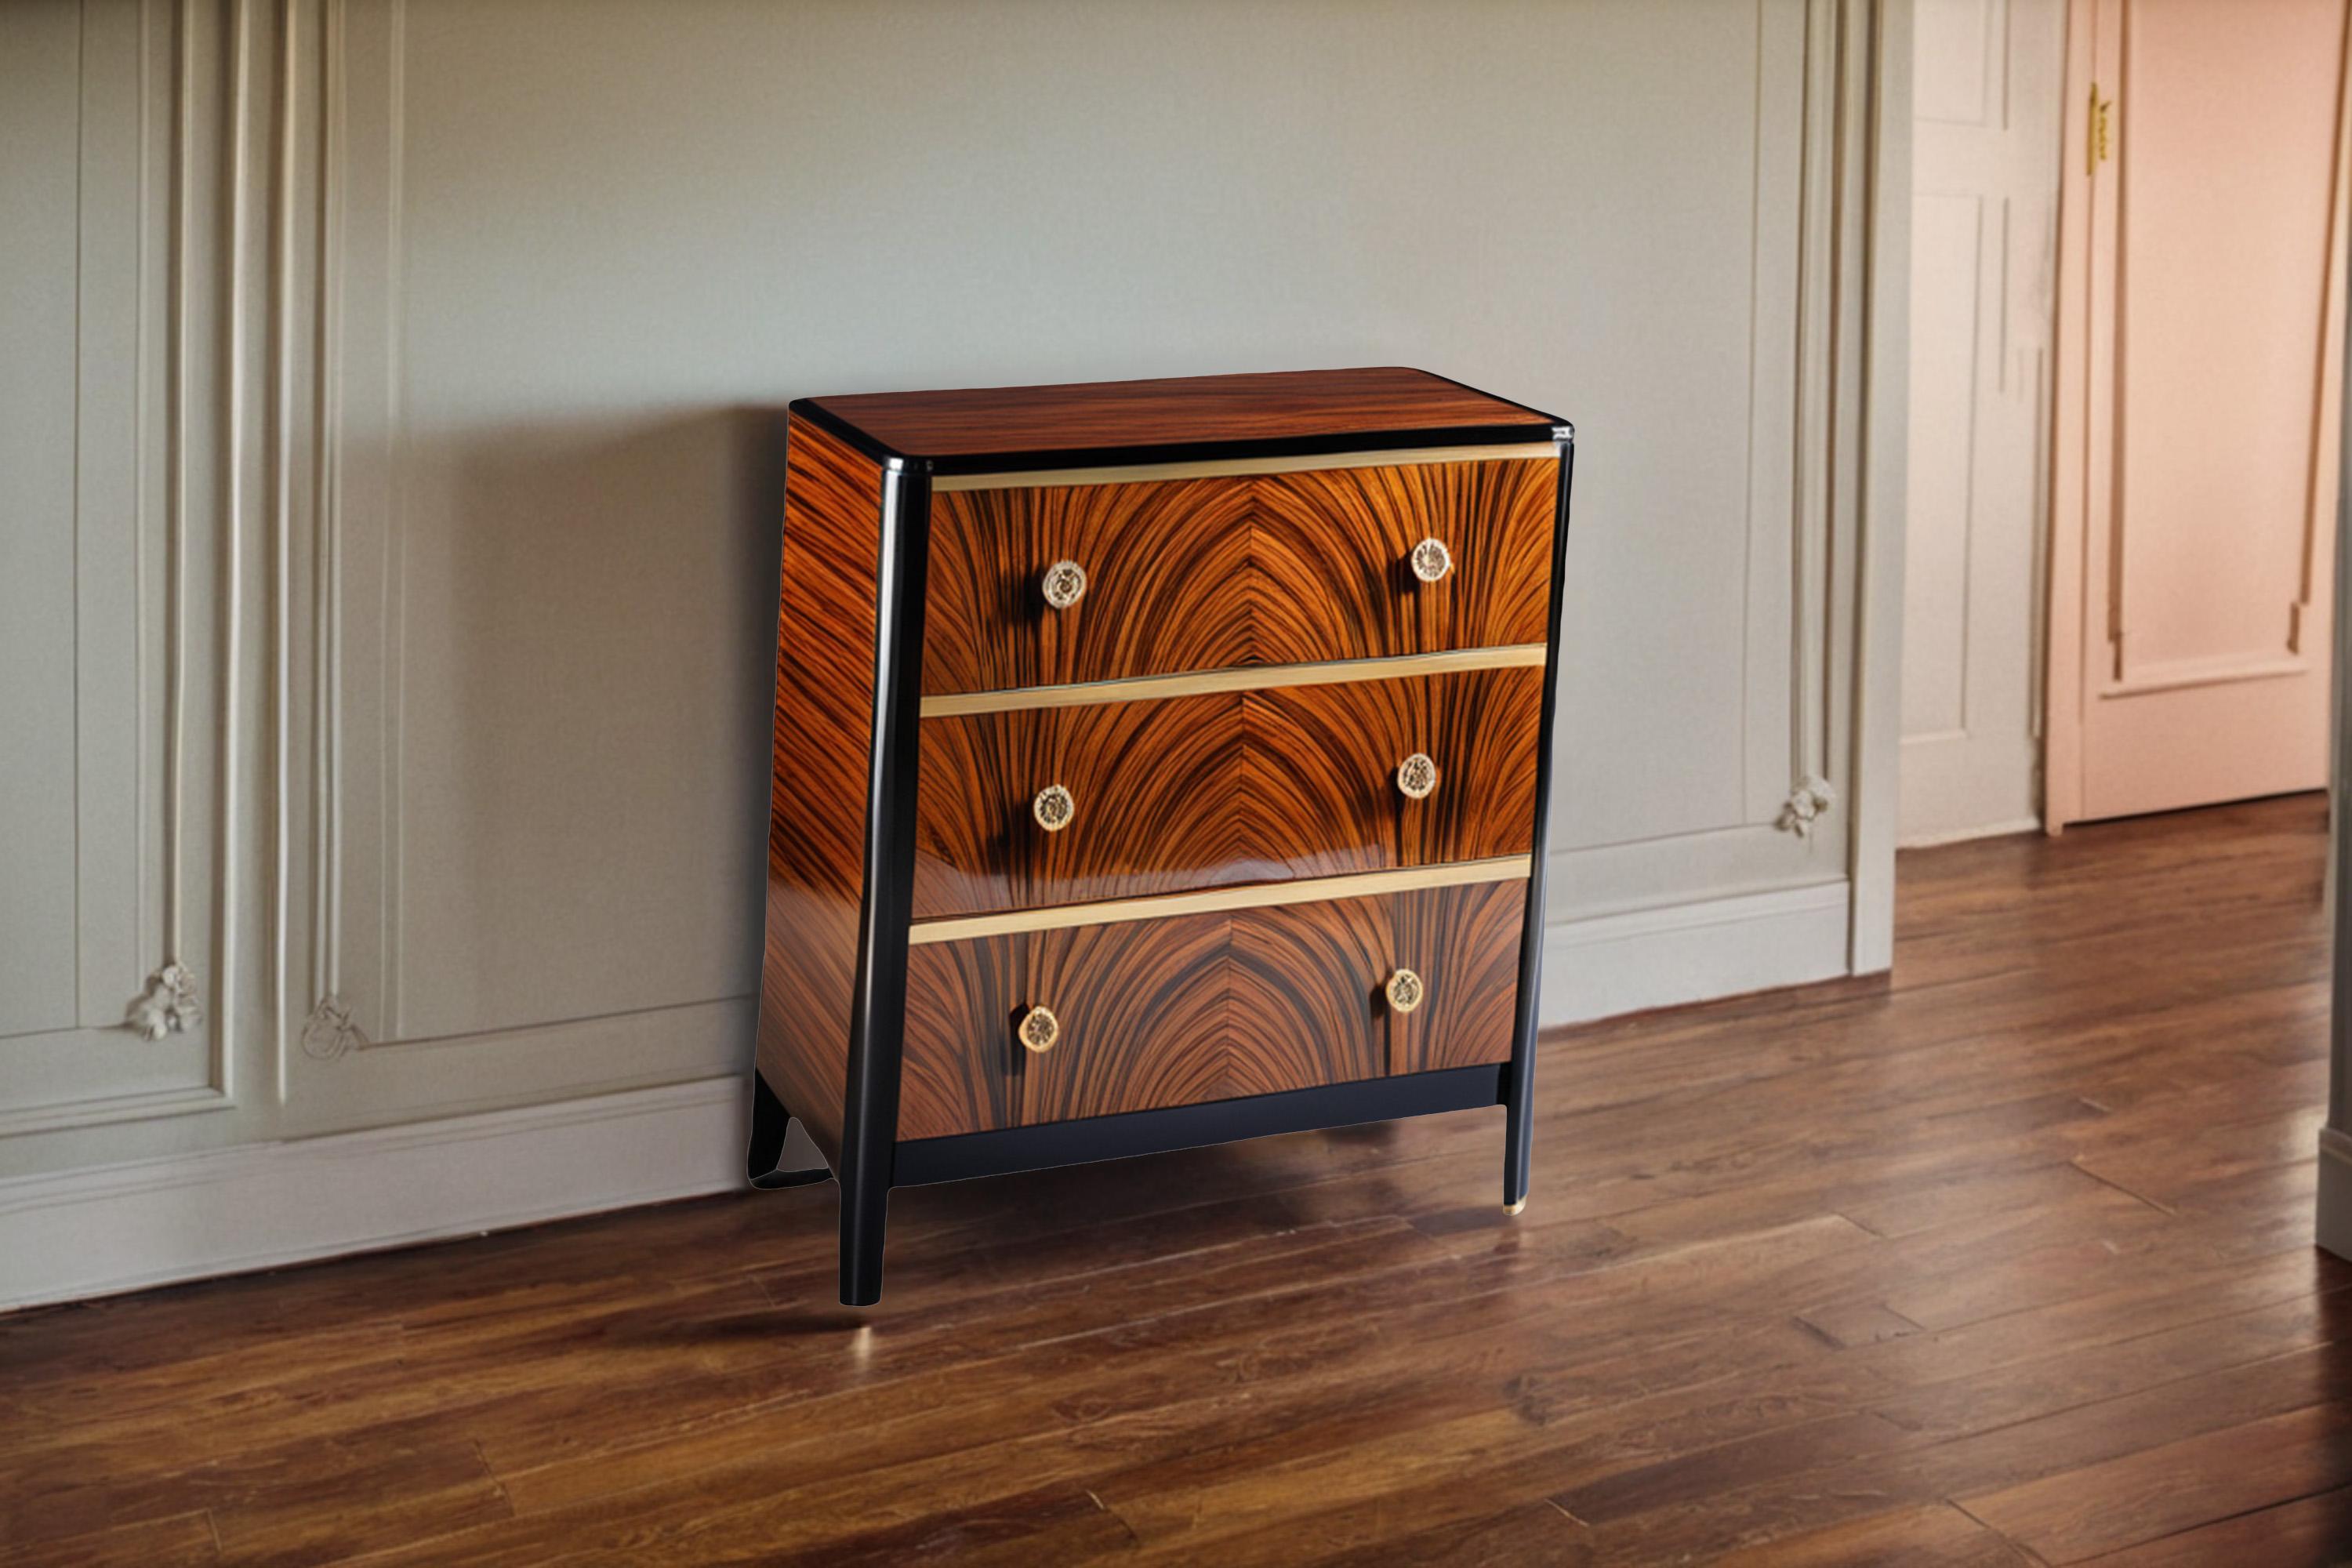 Beautiful little chest of drawers with very elegant macassar veneer and brass handles. The chest of drawers has three drawers and is equipped with round brass handles. The surface was sealed with a high-gloss varnish. The black surface was painted